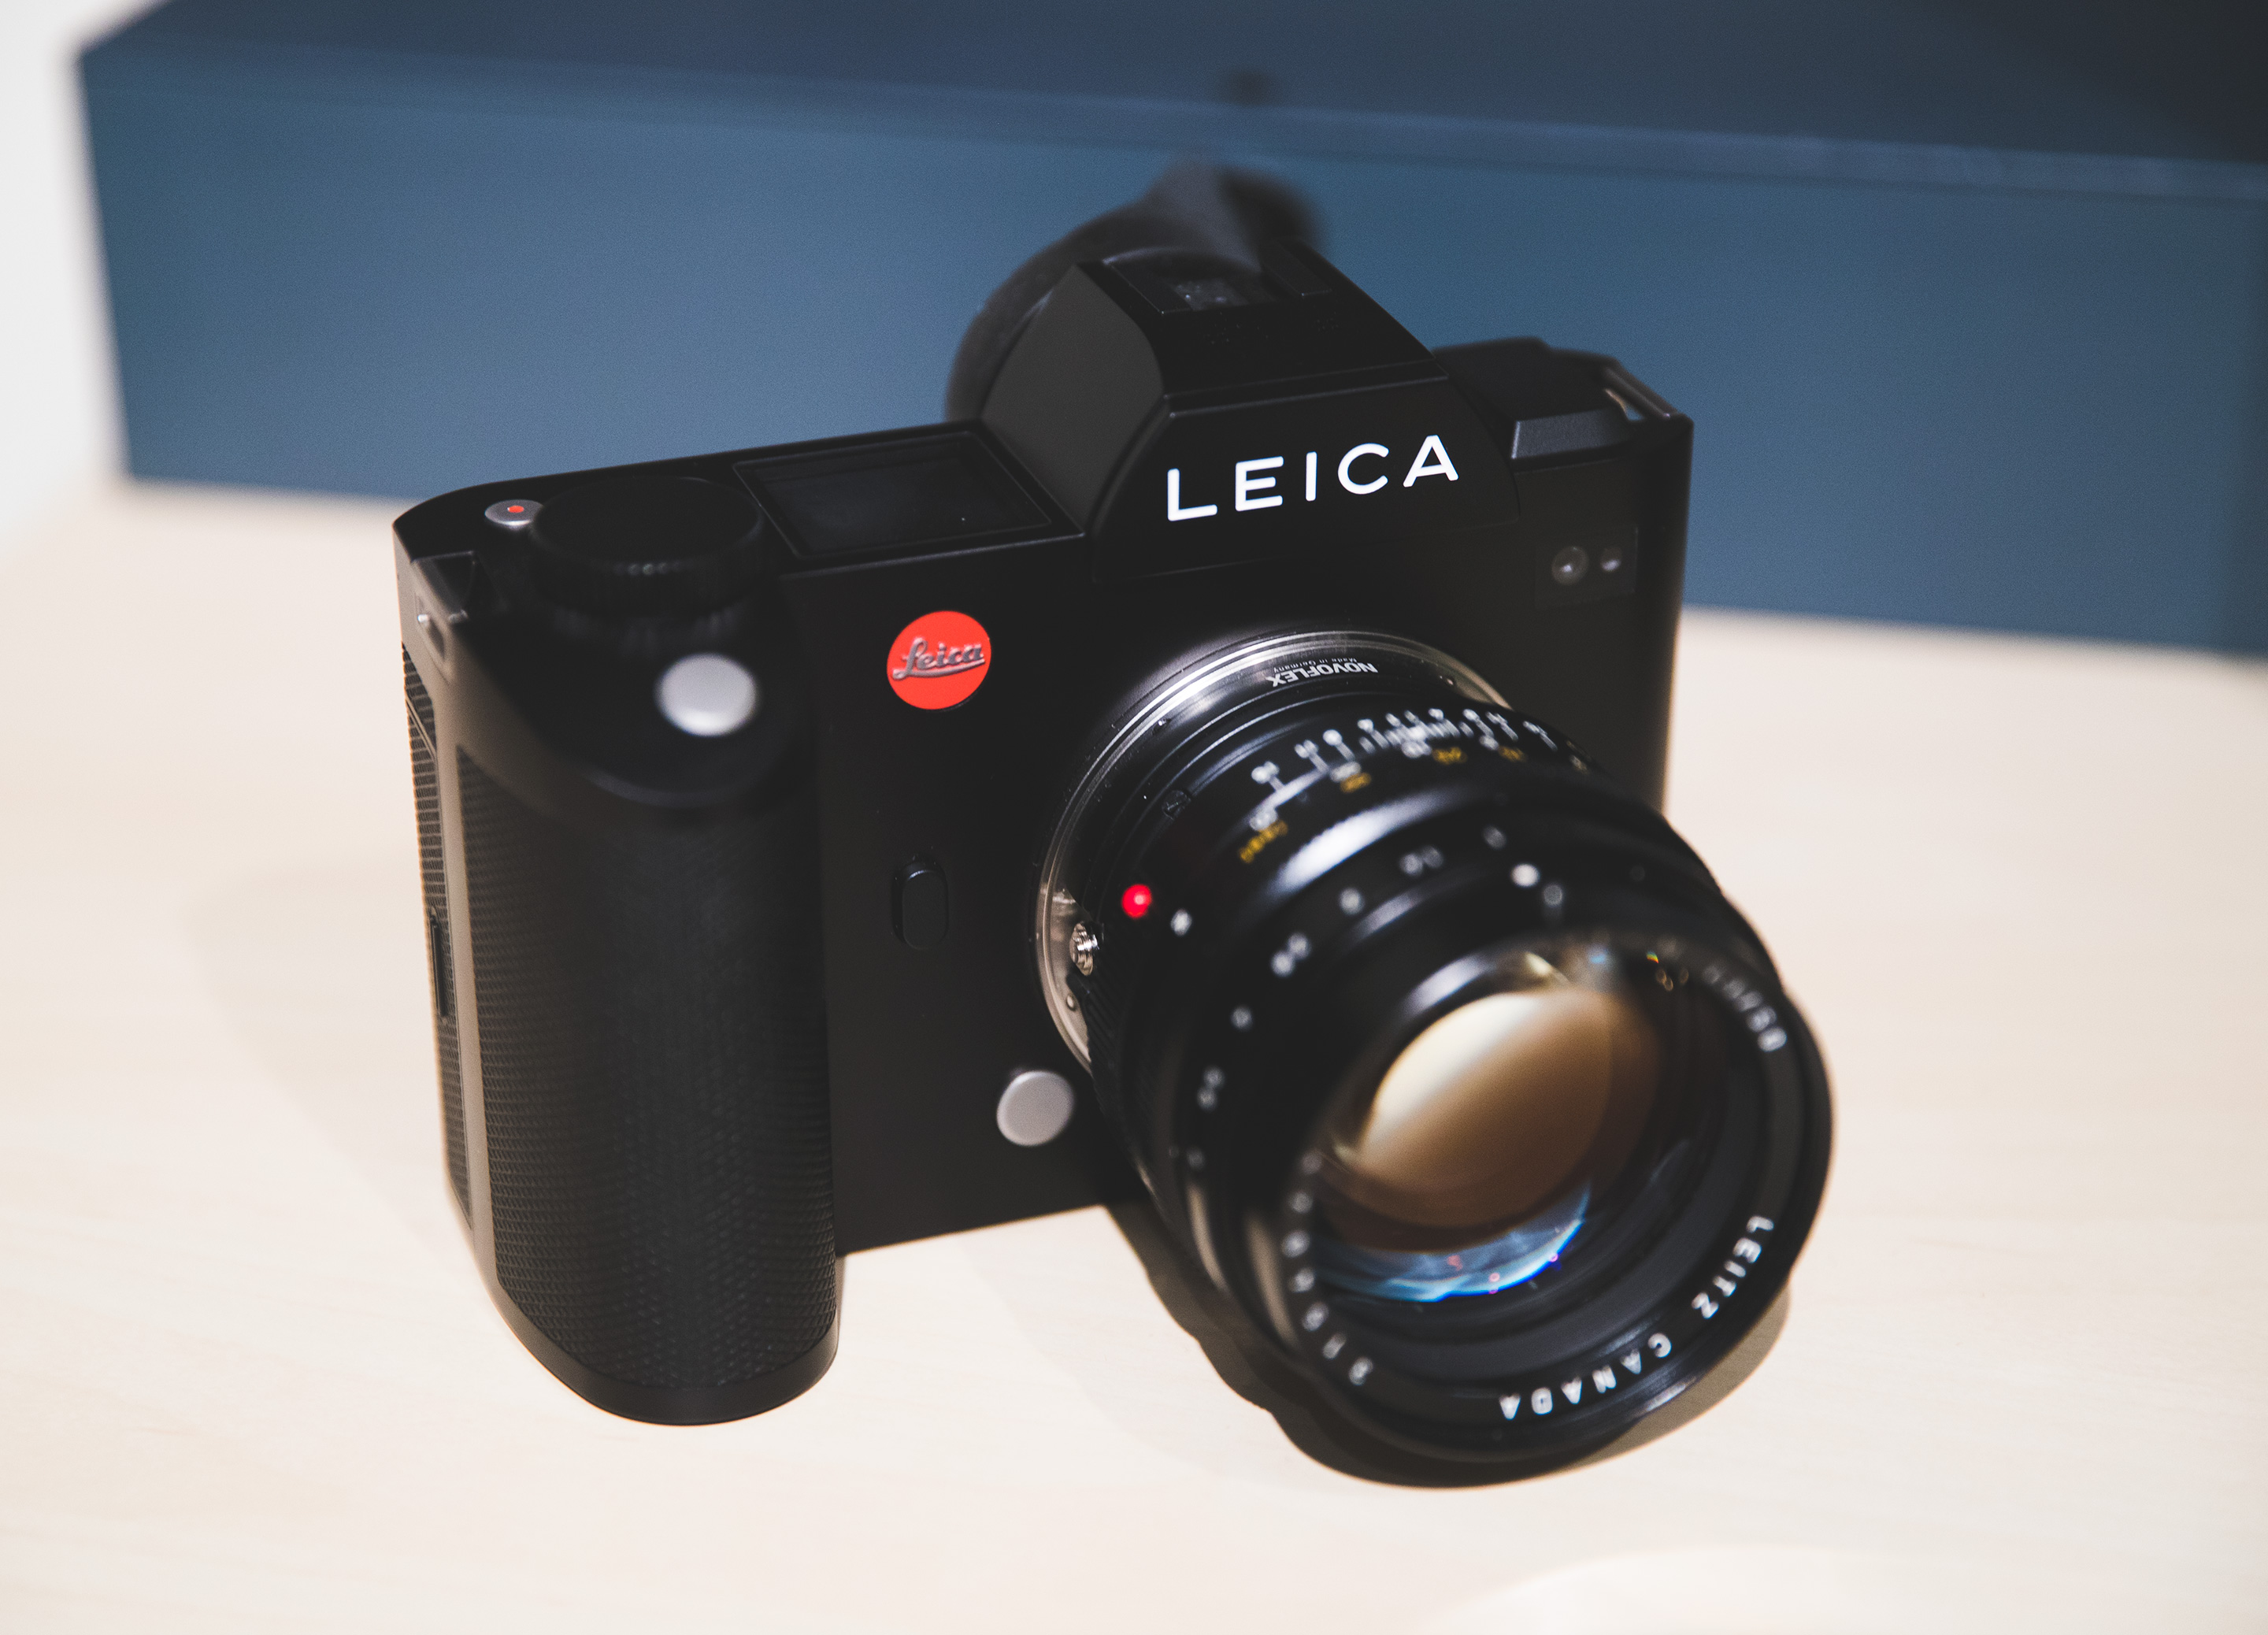 The Leica SL upgrade for Sony A7R II shooters - - Filmmaking Gear Camera